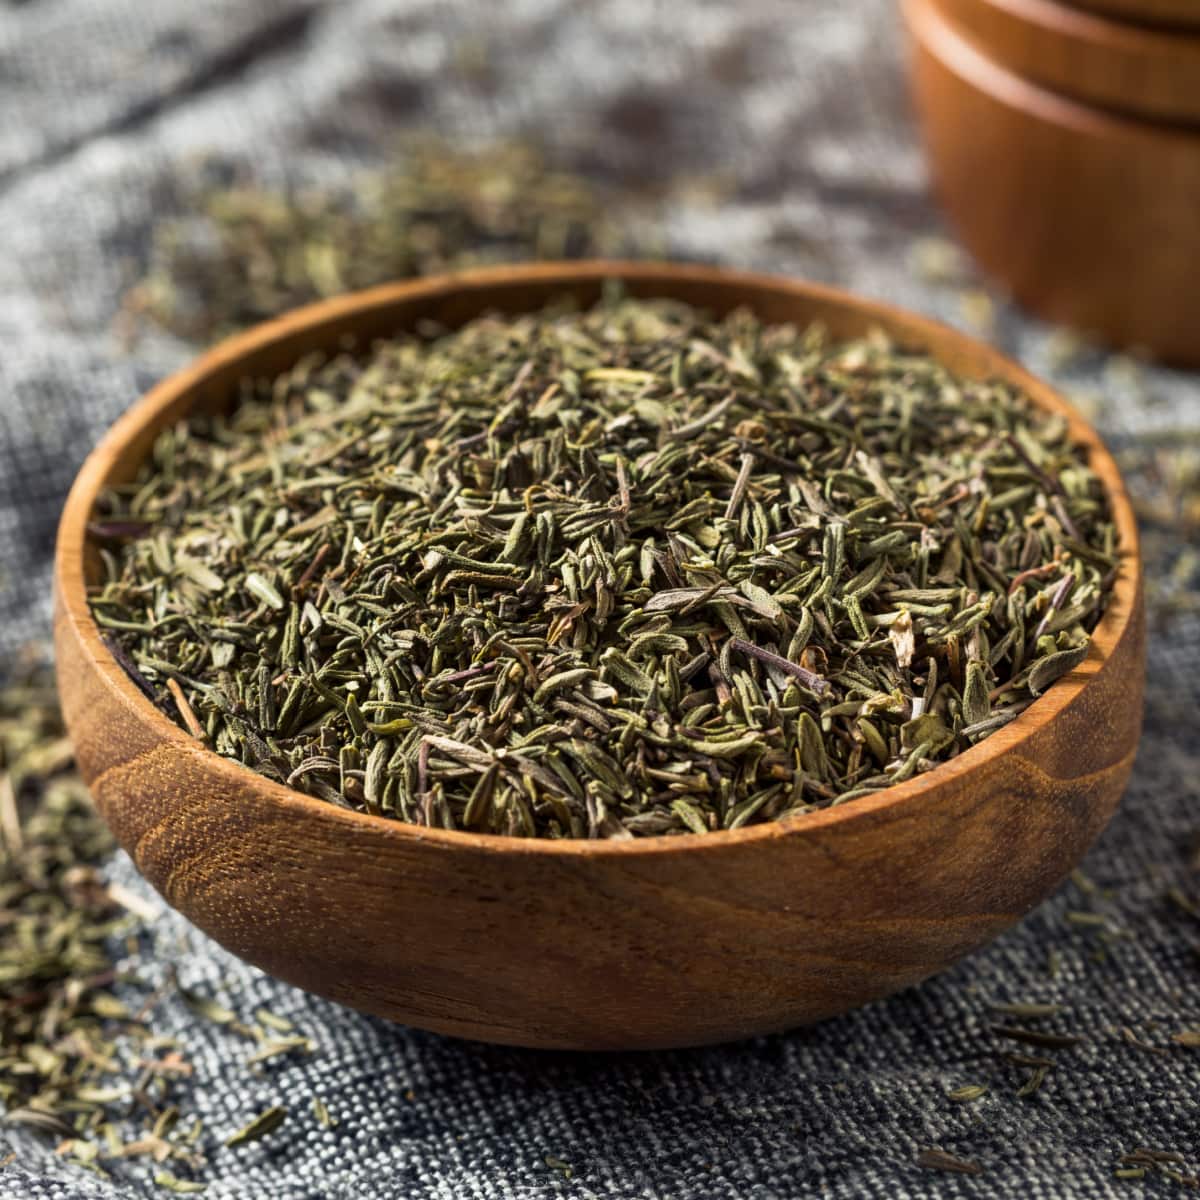 Dried Organic Thyme on a Wooden Bowl